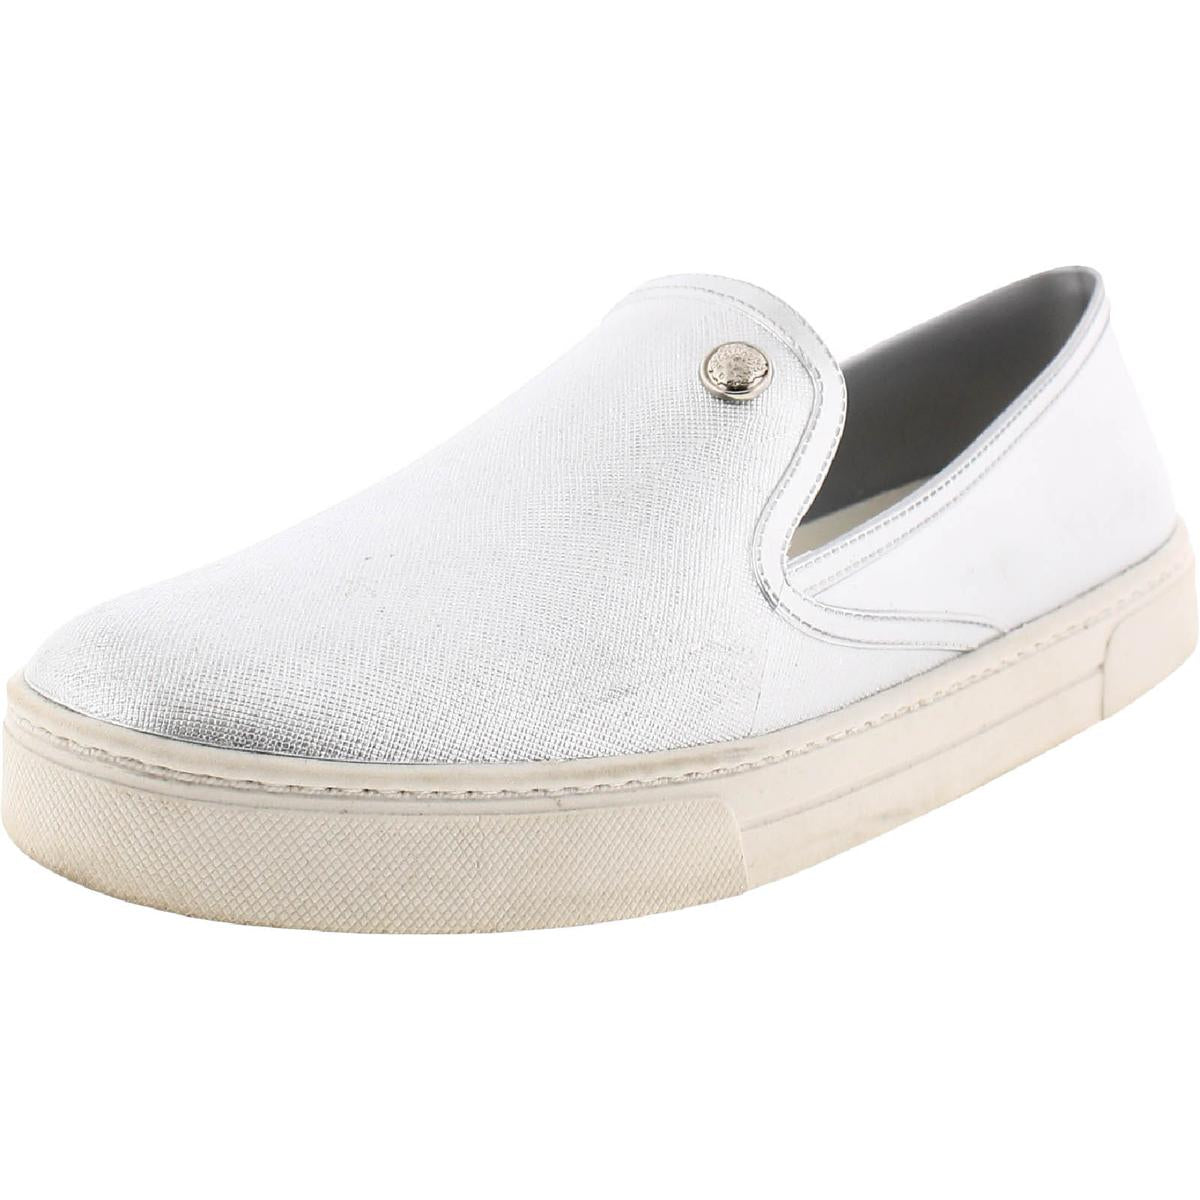 Vince Camuto Marjetta Women's Faux Leather Casual Slip On Sneakers